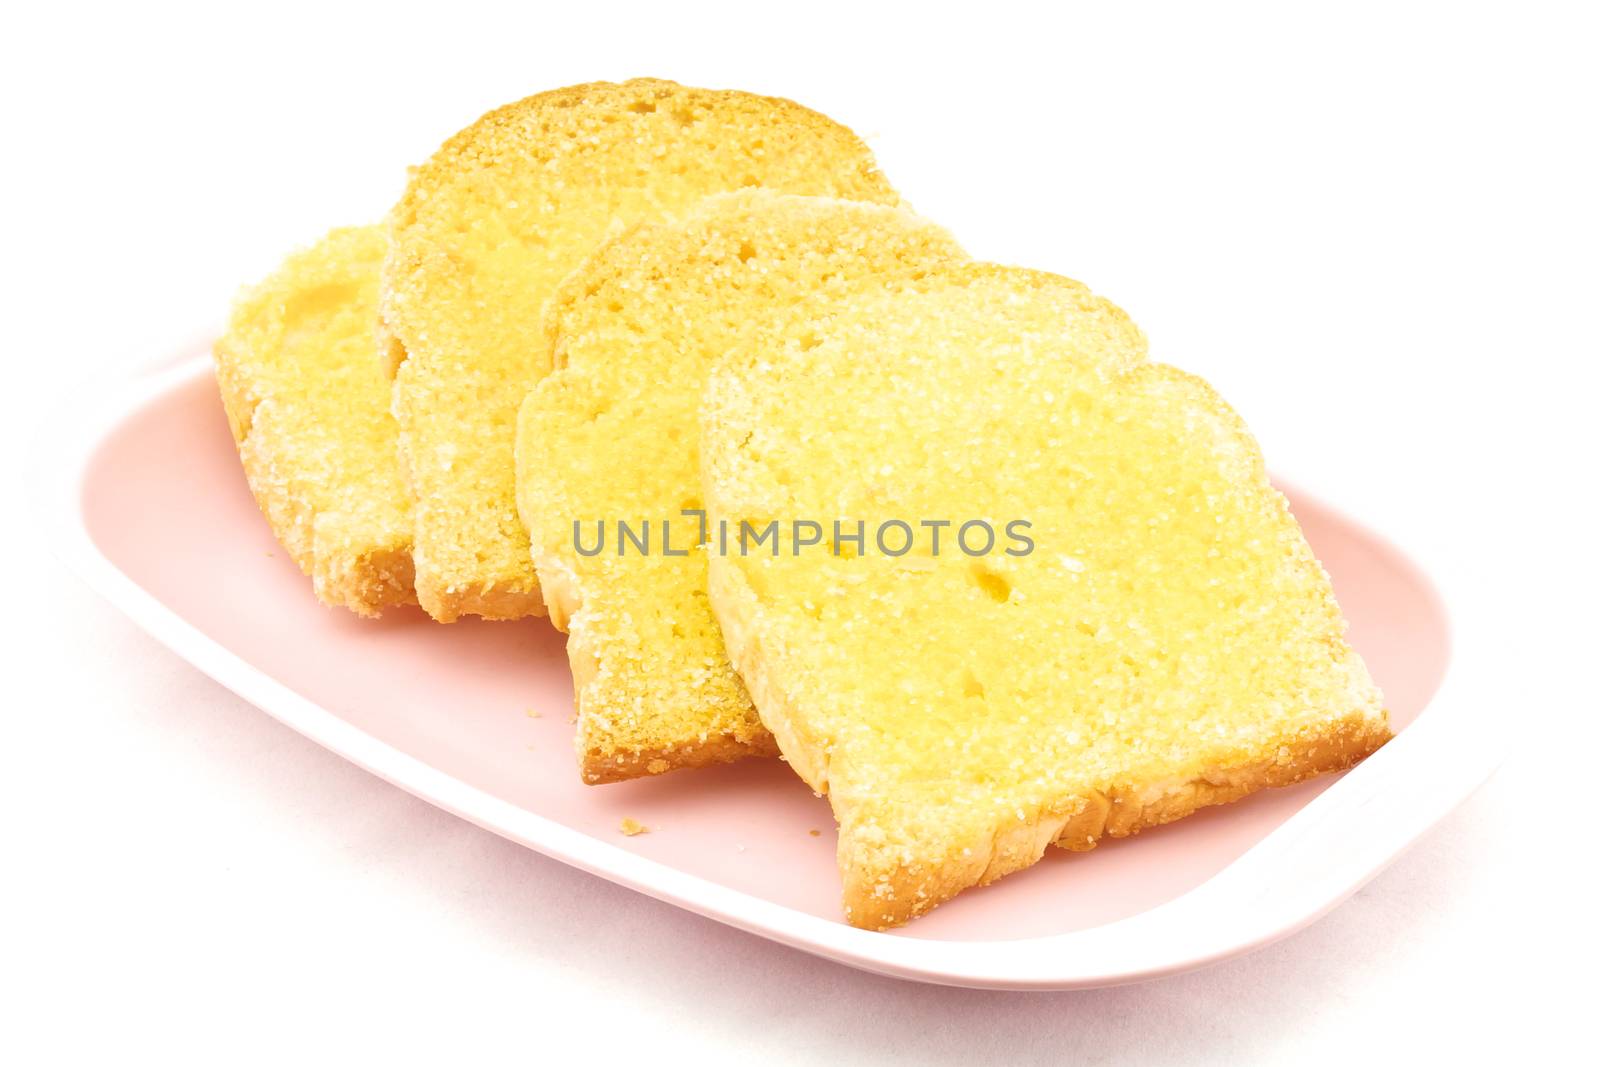 Bread baked with butter and sugar placed in a pink tray on white background.